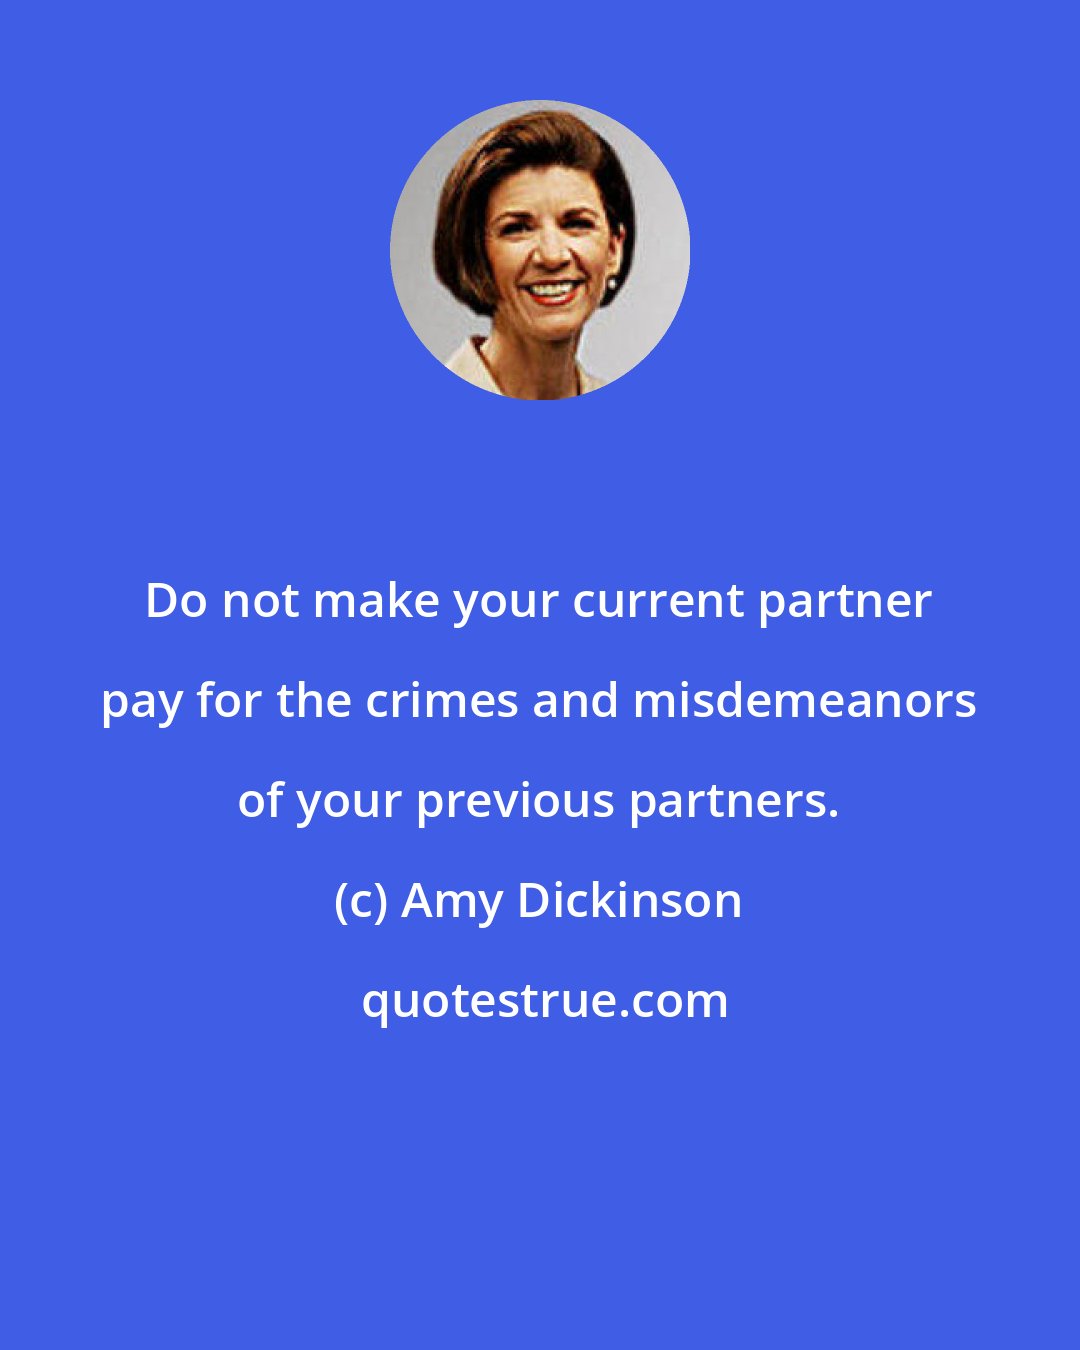 Amy Dickinson: Do not make your current partner pay for the crimes and misdemeanors of your previous partners.